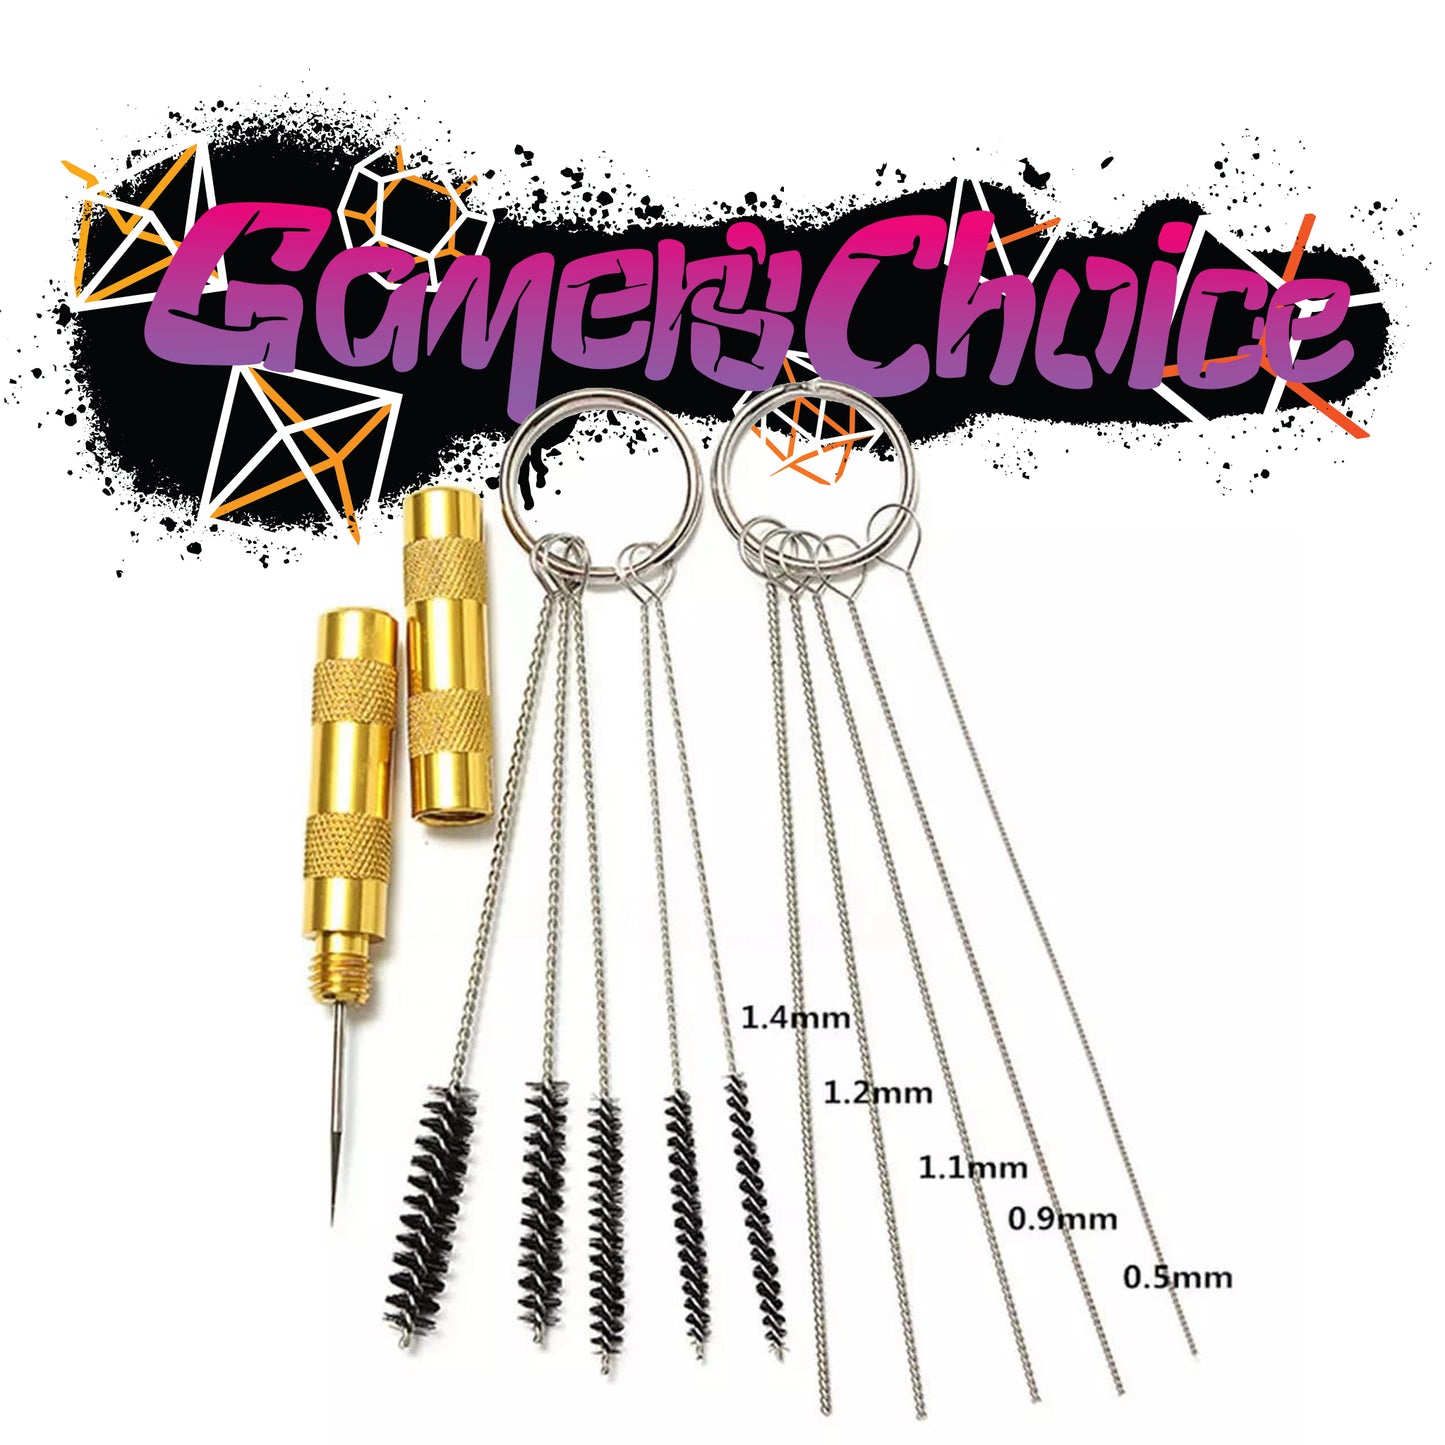 Gamer's Choice Airbrush Cleaning Tools